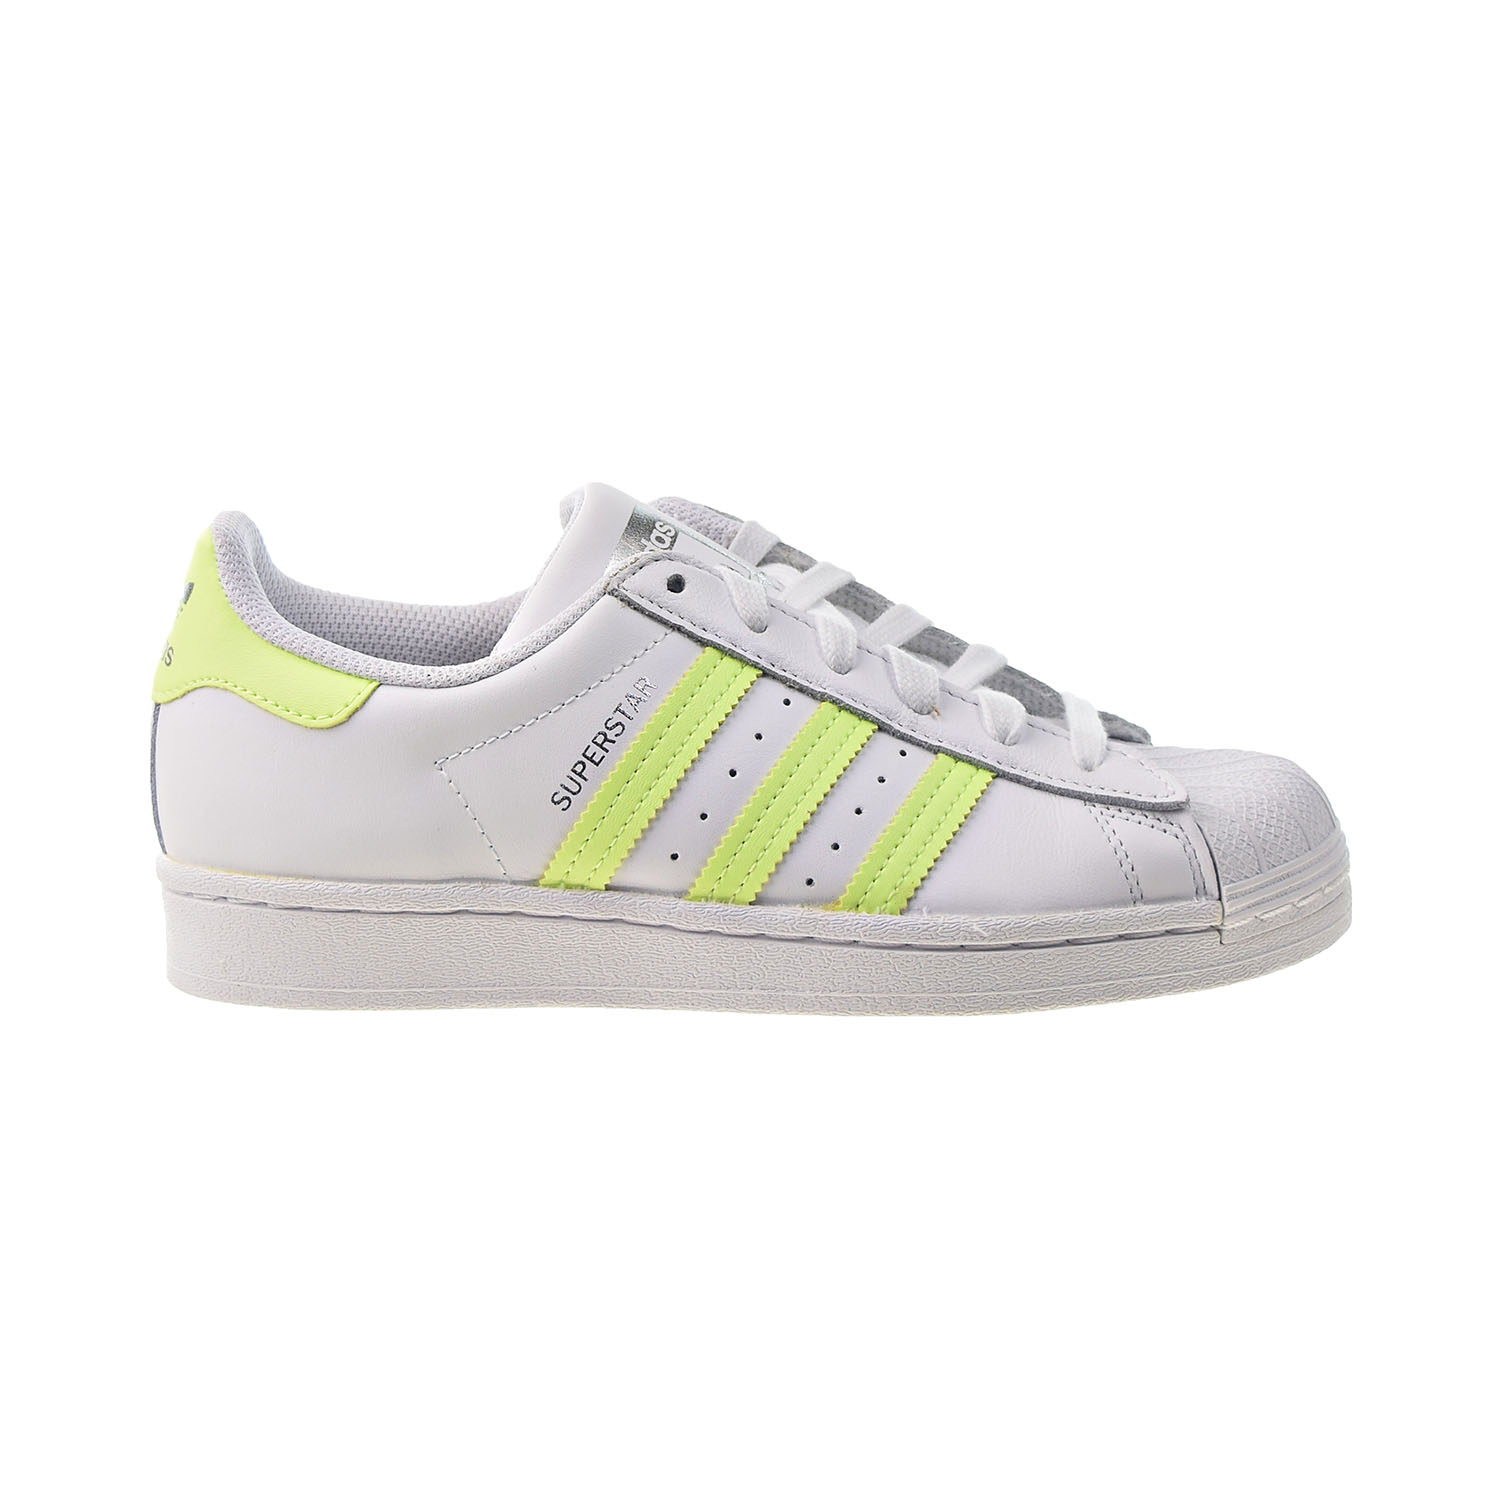 Adidas Superstar Women's Shoes White-Hi Res Yellow-Matte Silver fx6090